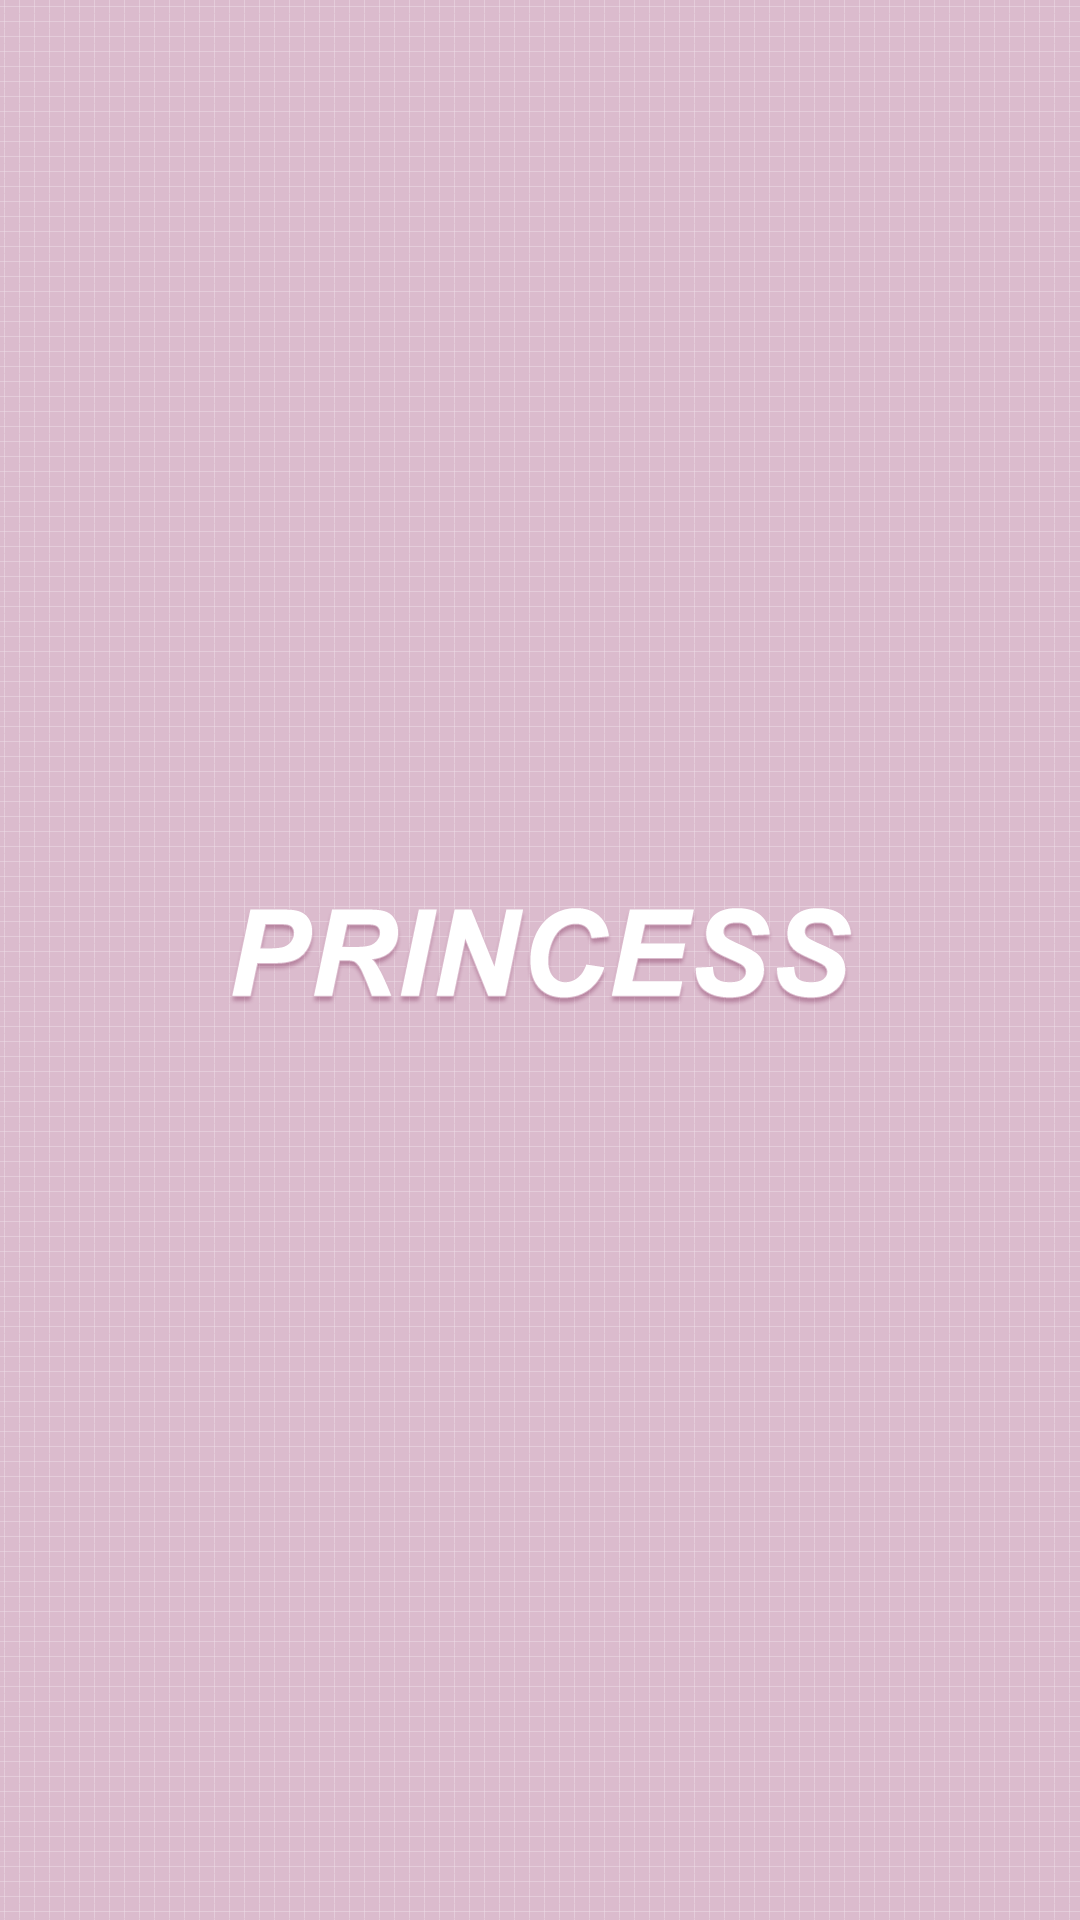 Pink background with the word princess in white - Princess